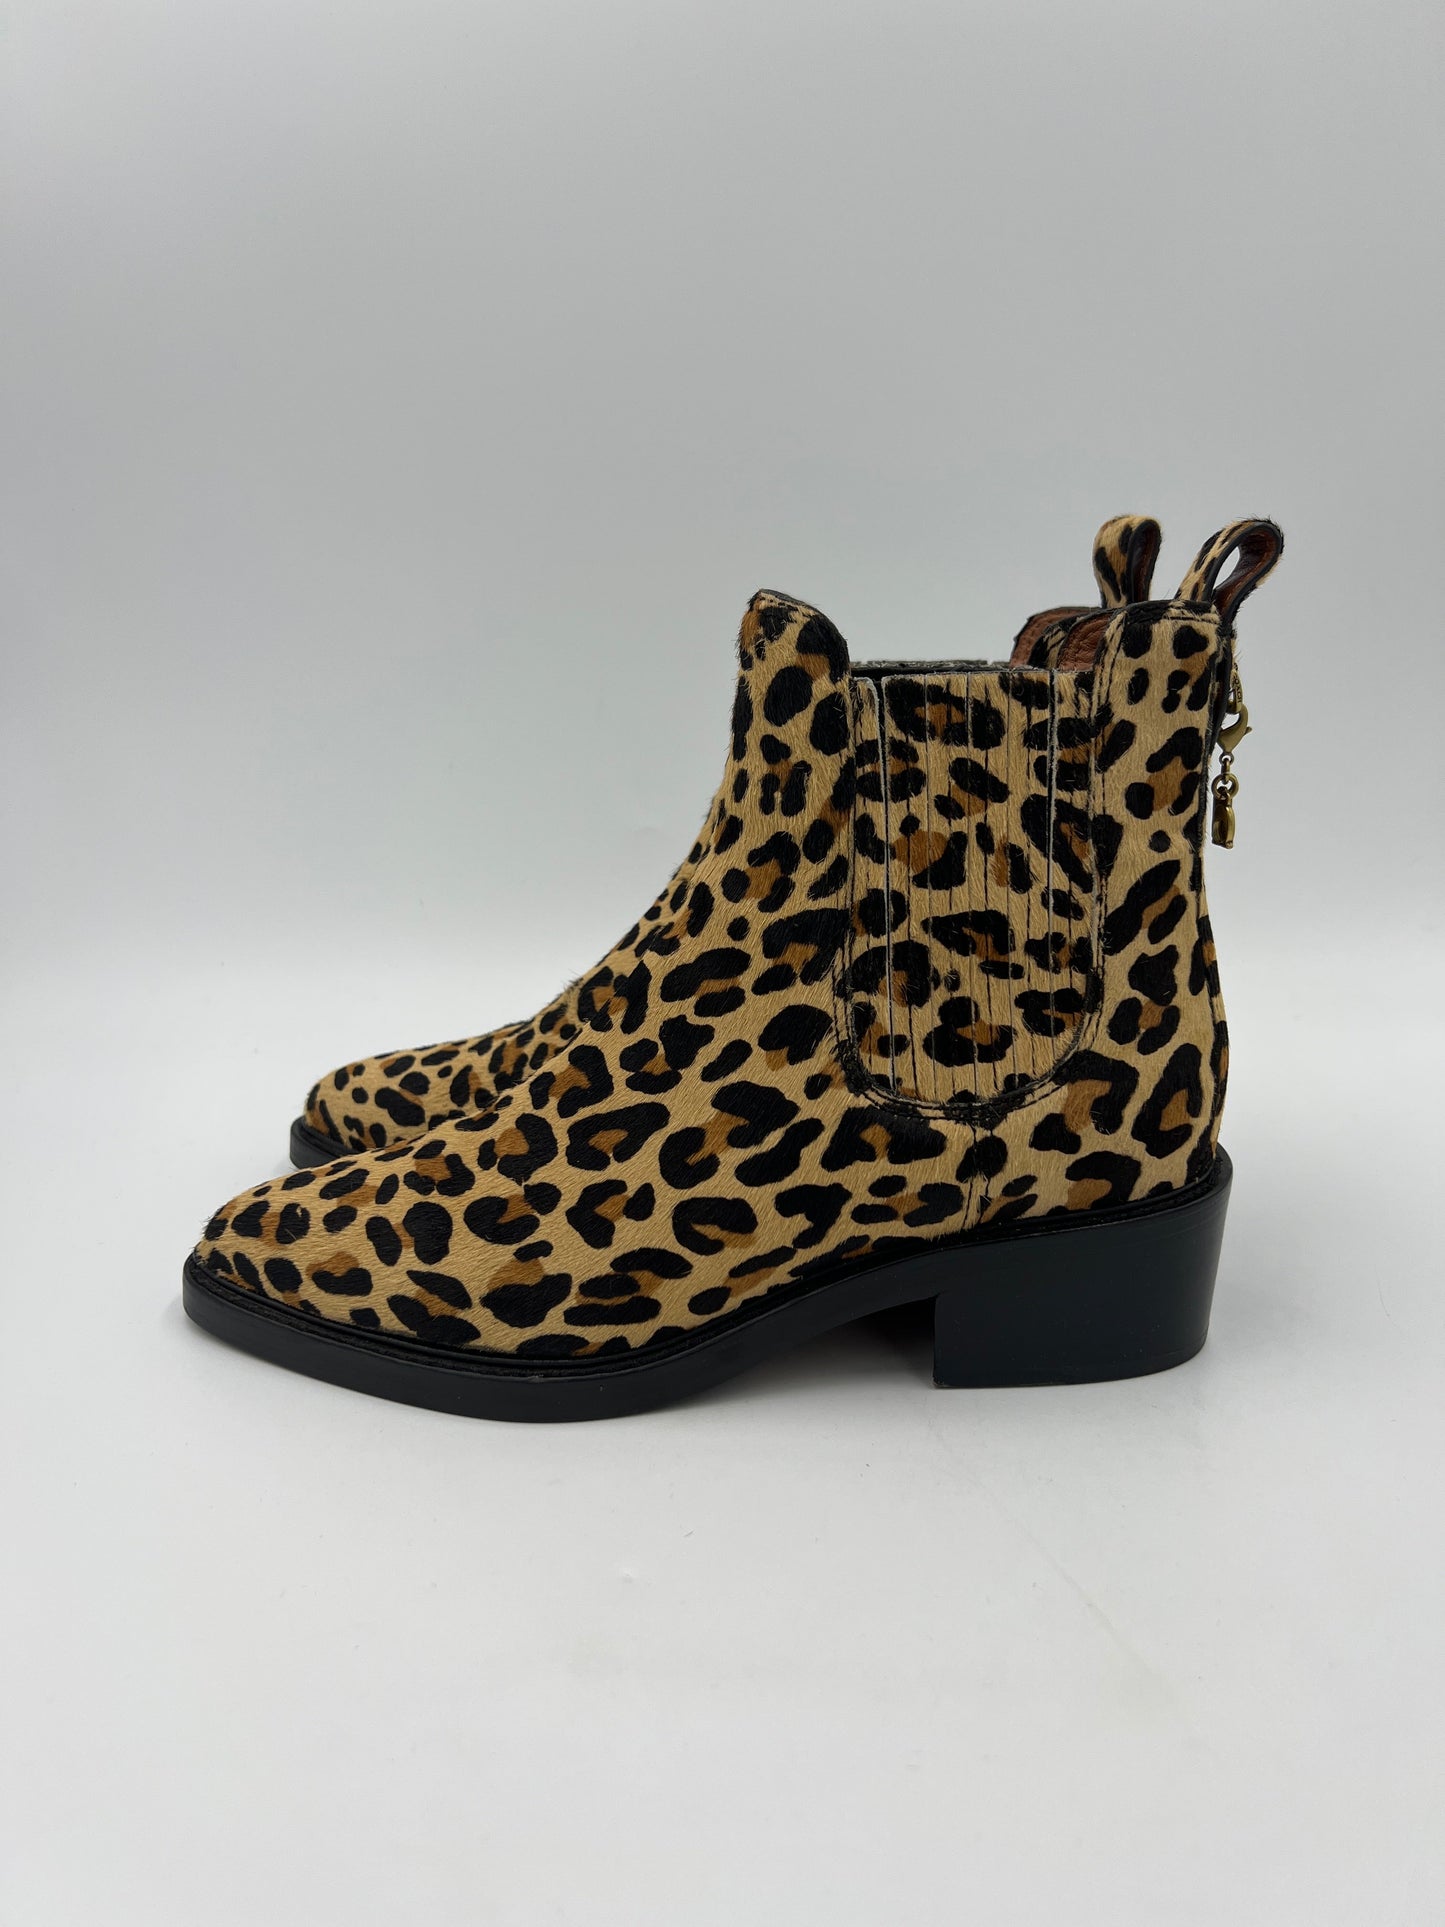 Boots Designer By Coach  Size: 5.5